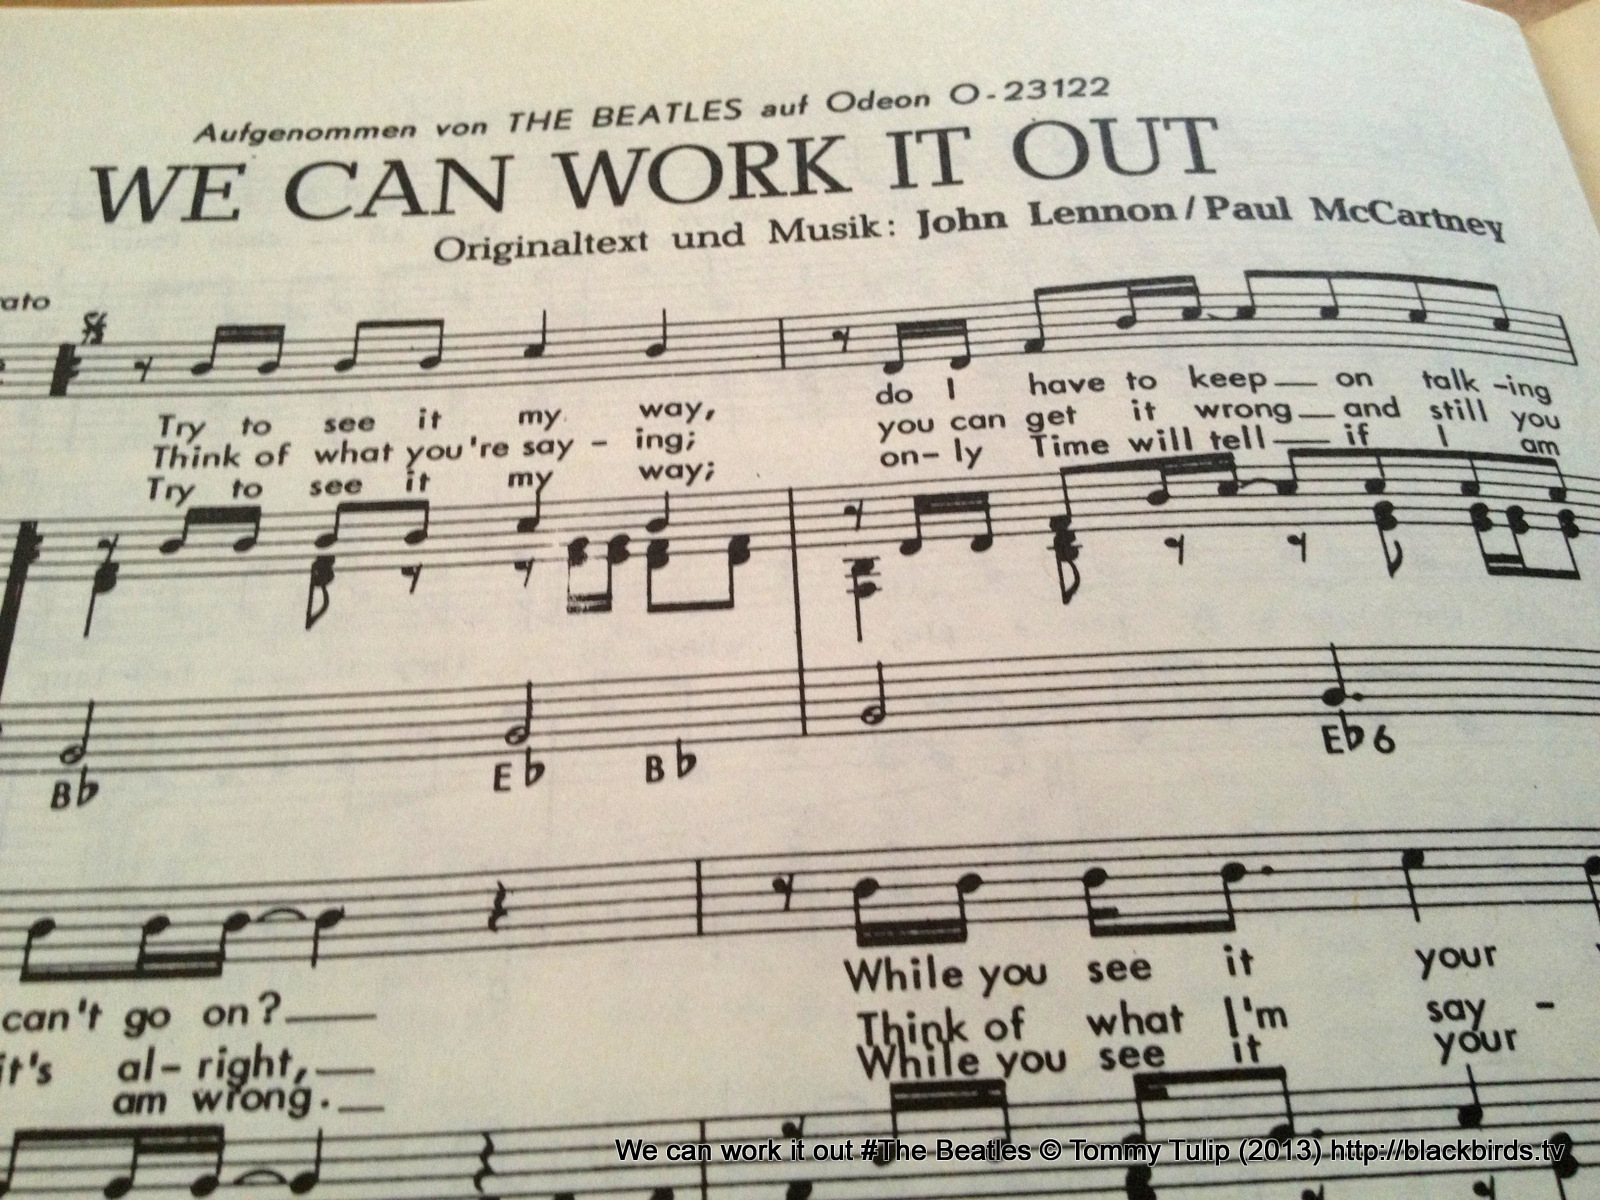 We can work it out #The Beatles